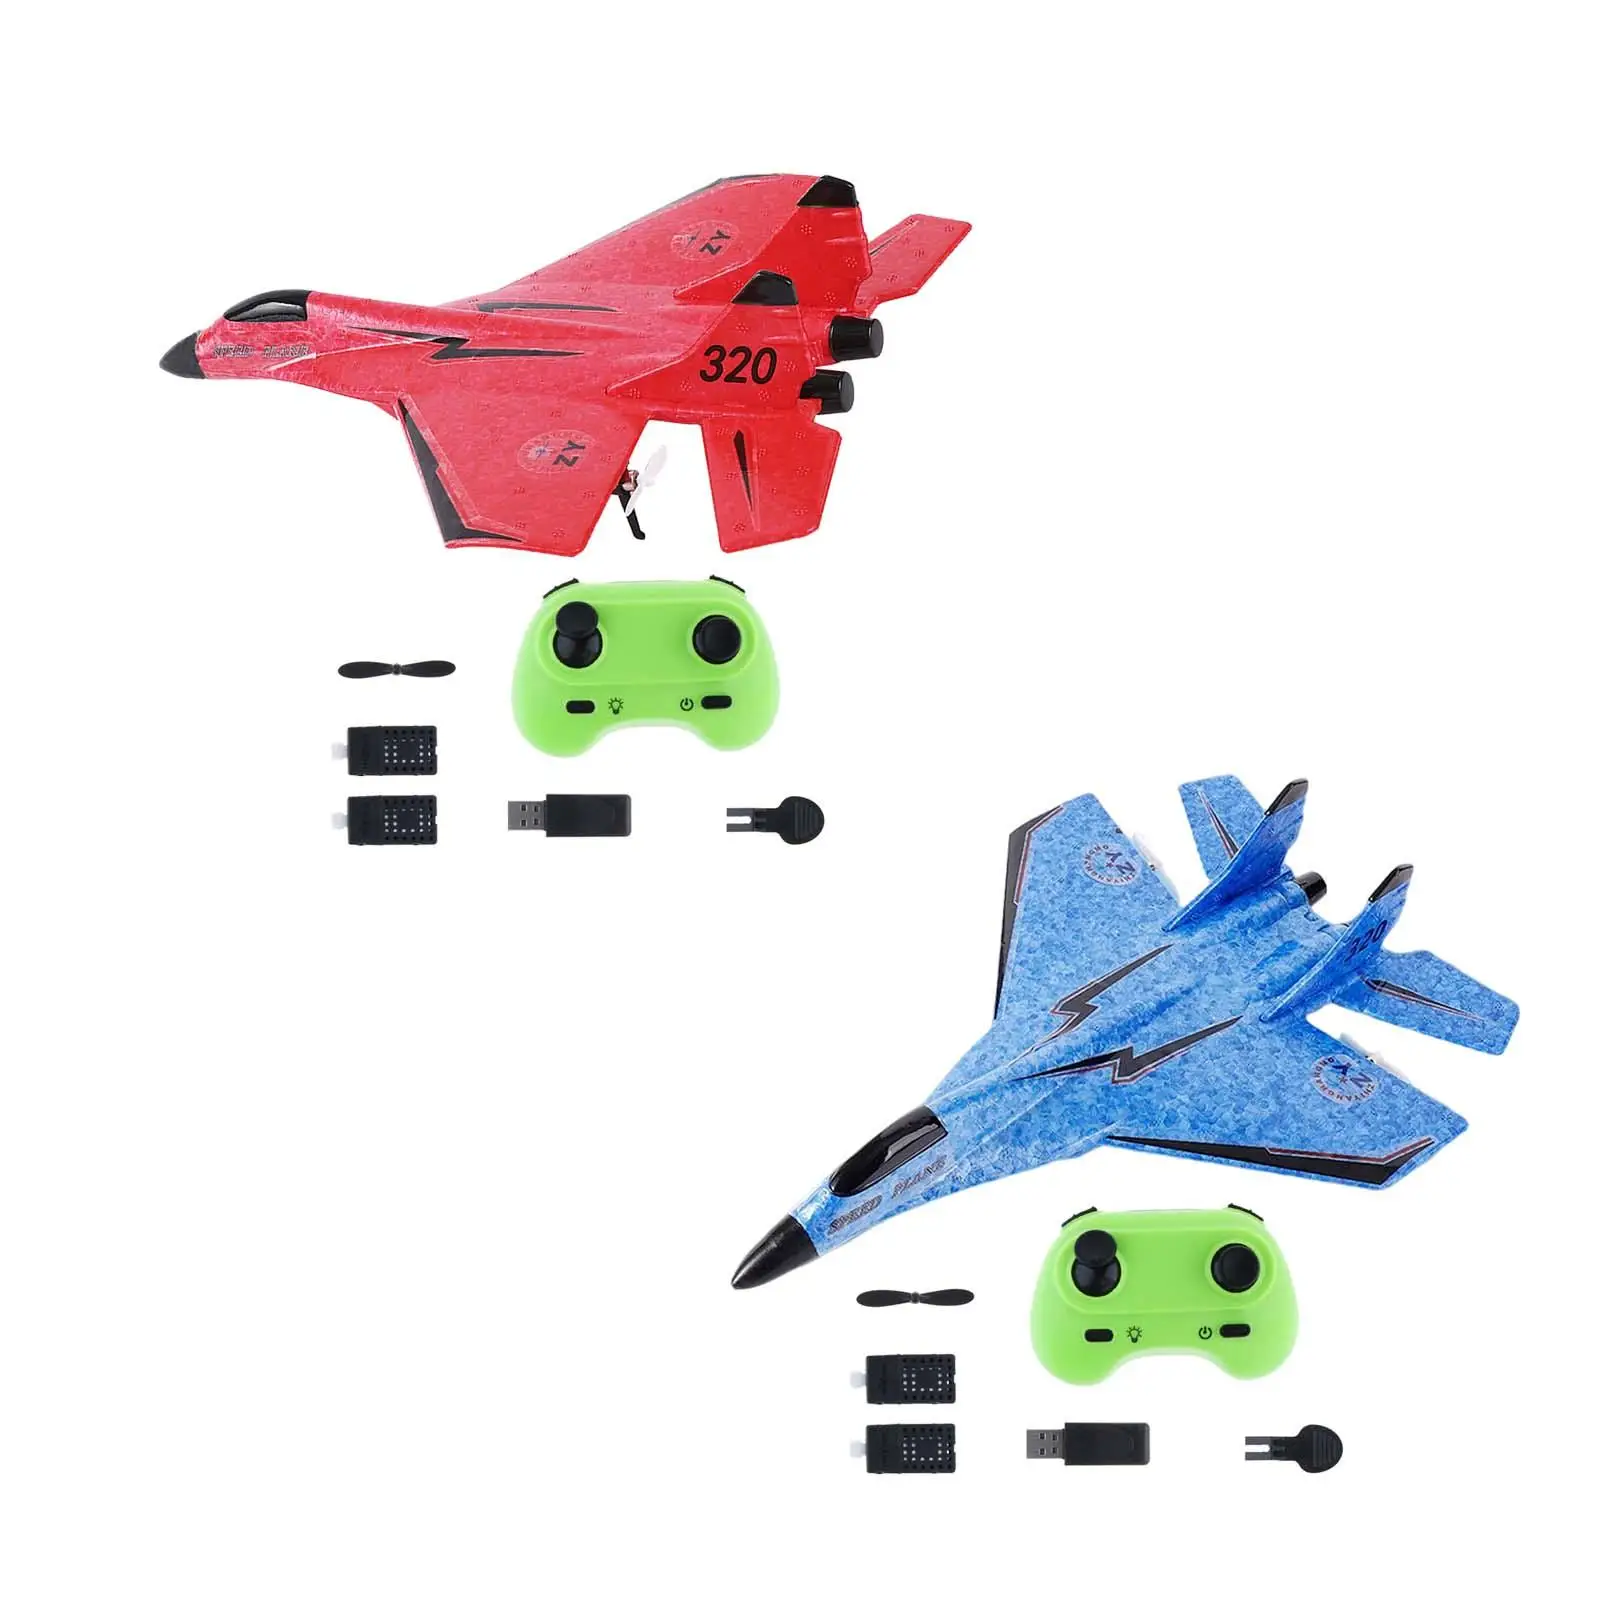 2CH RC Plane Outdoor Toys Easy to Fly with Light Portable Remote Control Airplane Hobby RC Glider for Kids Beginner Boys Girls